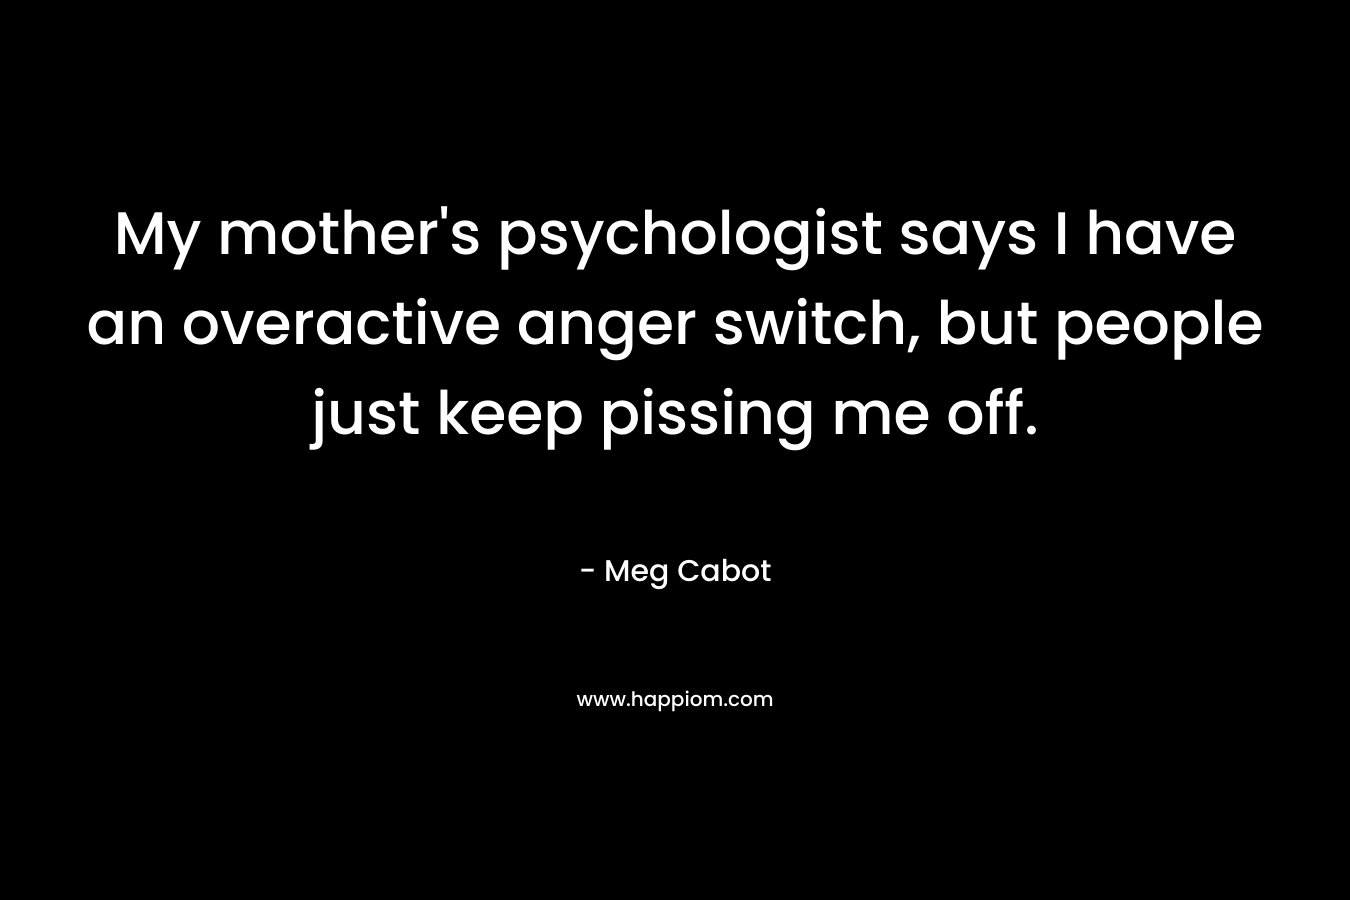 My mother’s psychologist says I have an overactive anger switch, but people just keep pissing me off. – Meg Cabot